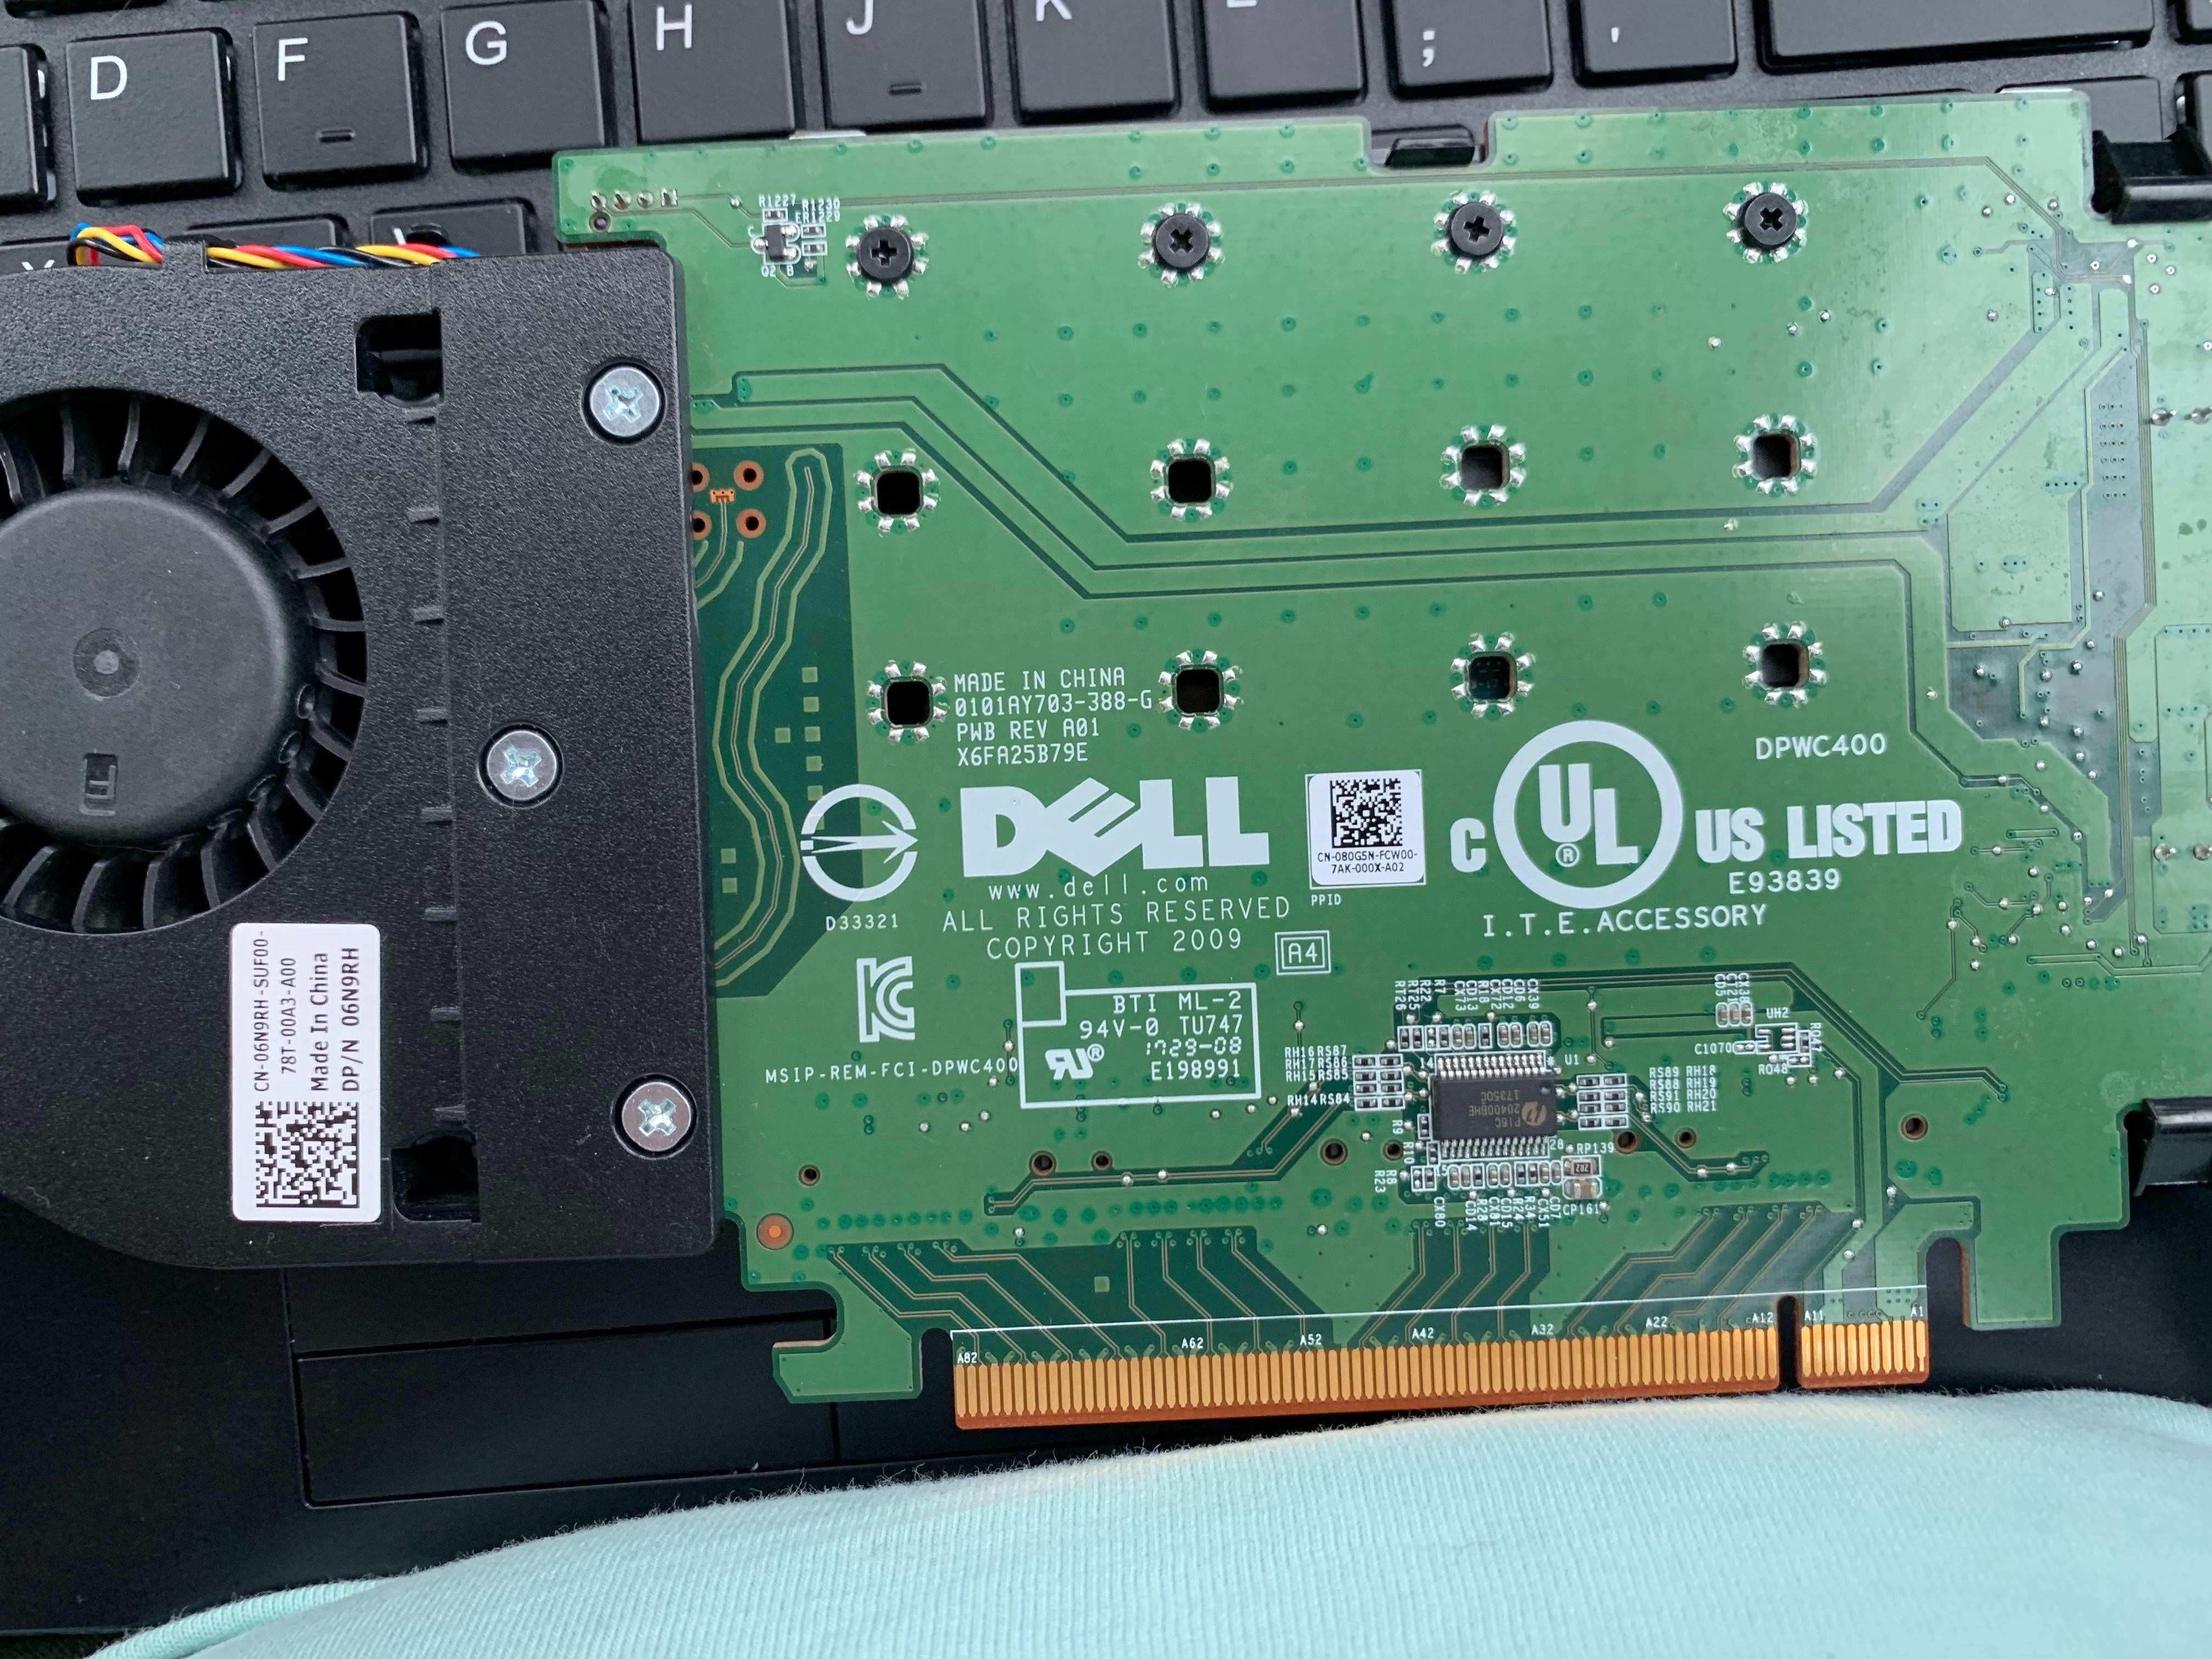 Dell DPWC400 Ultra-Speed Drive Quad NVMe  PCIe x16 Card For Sale |  